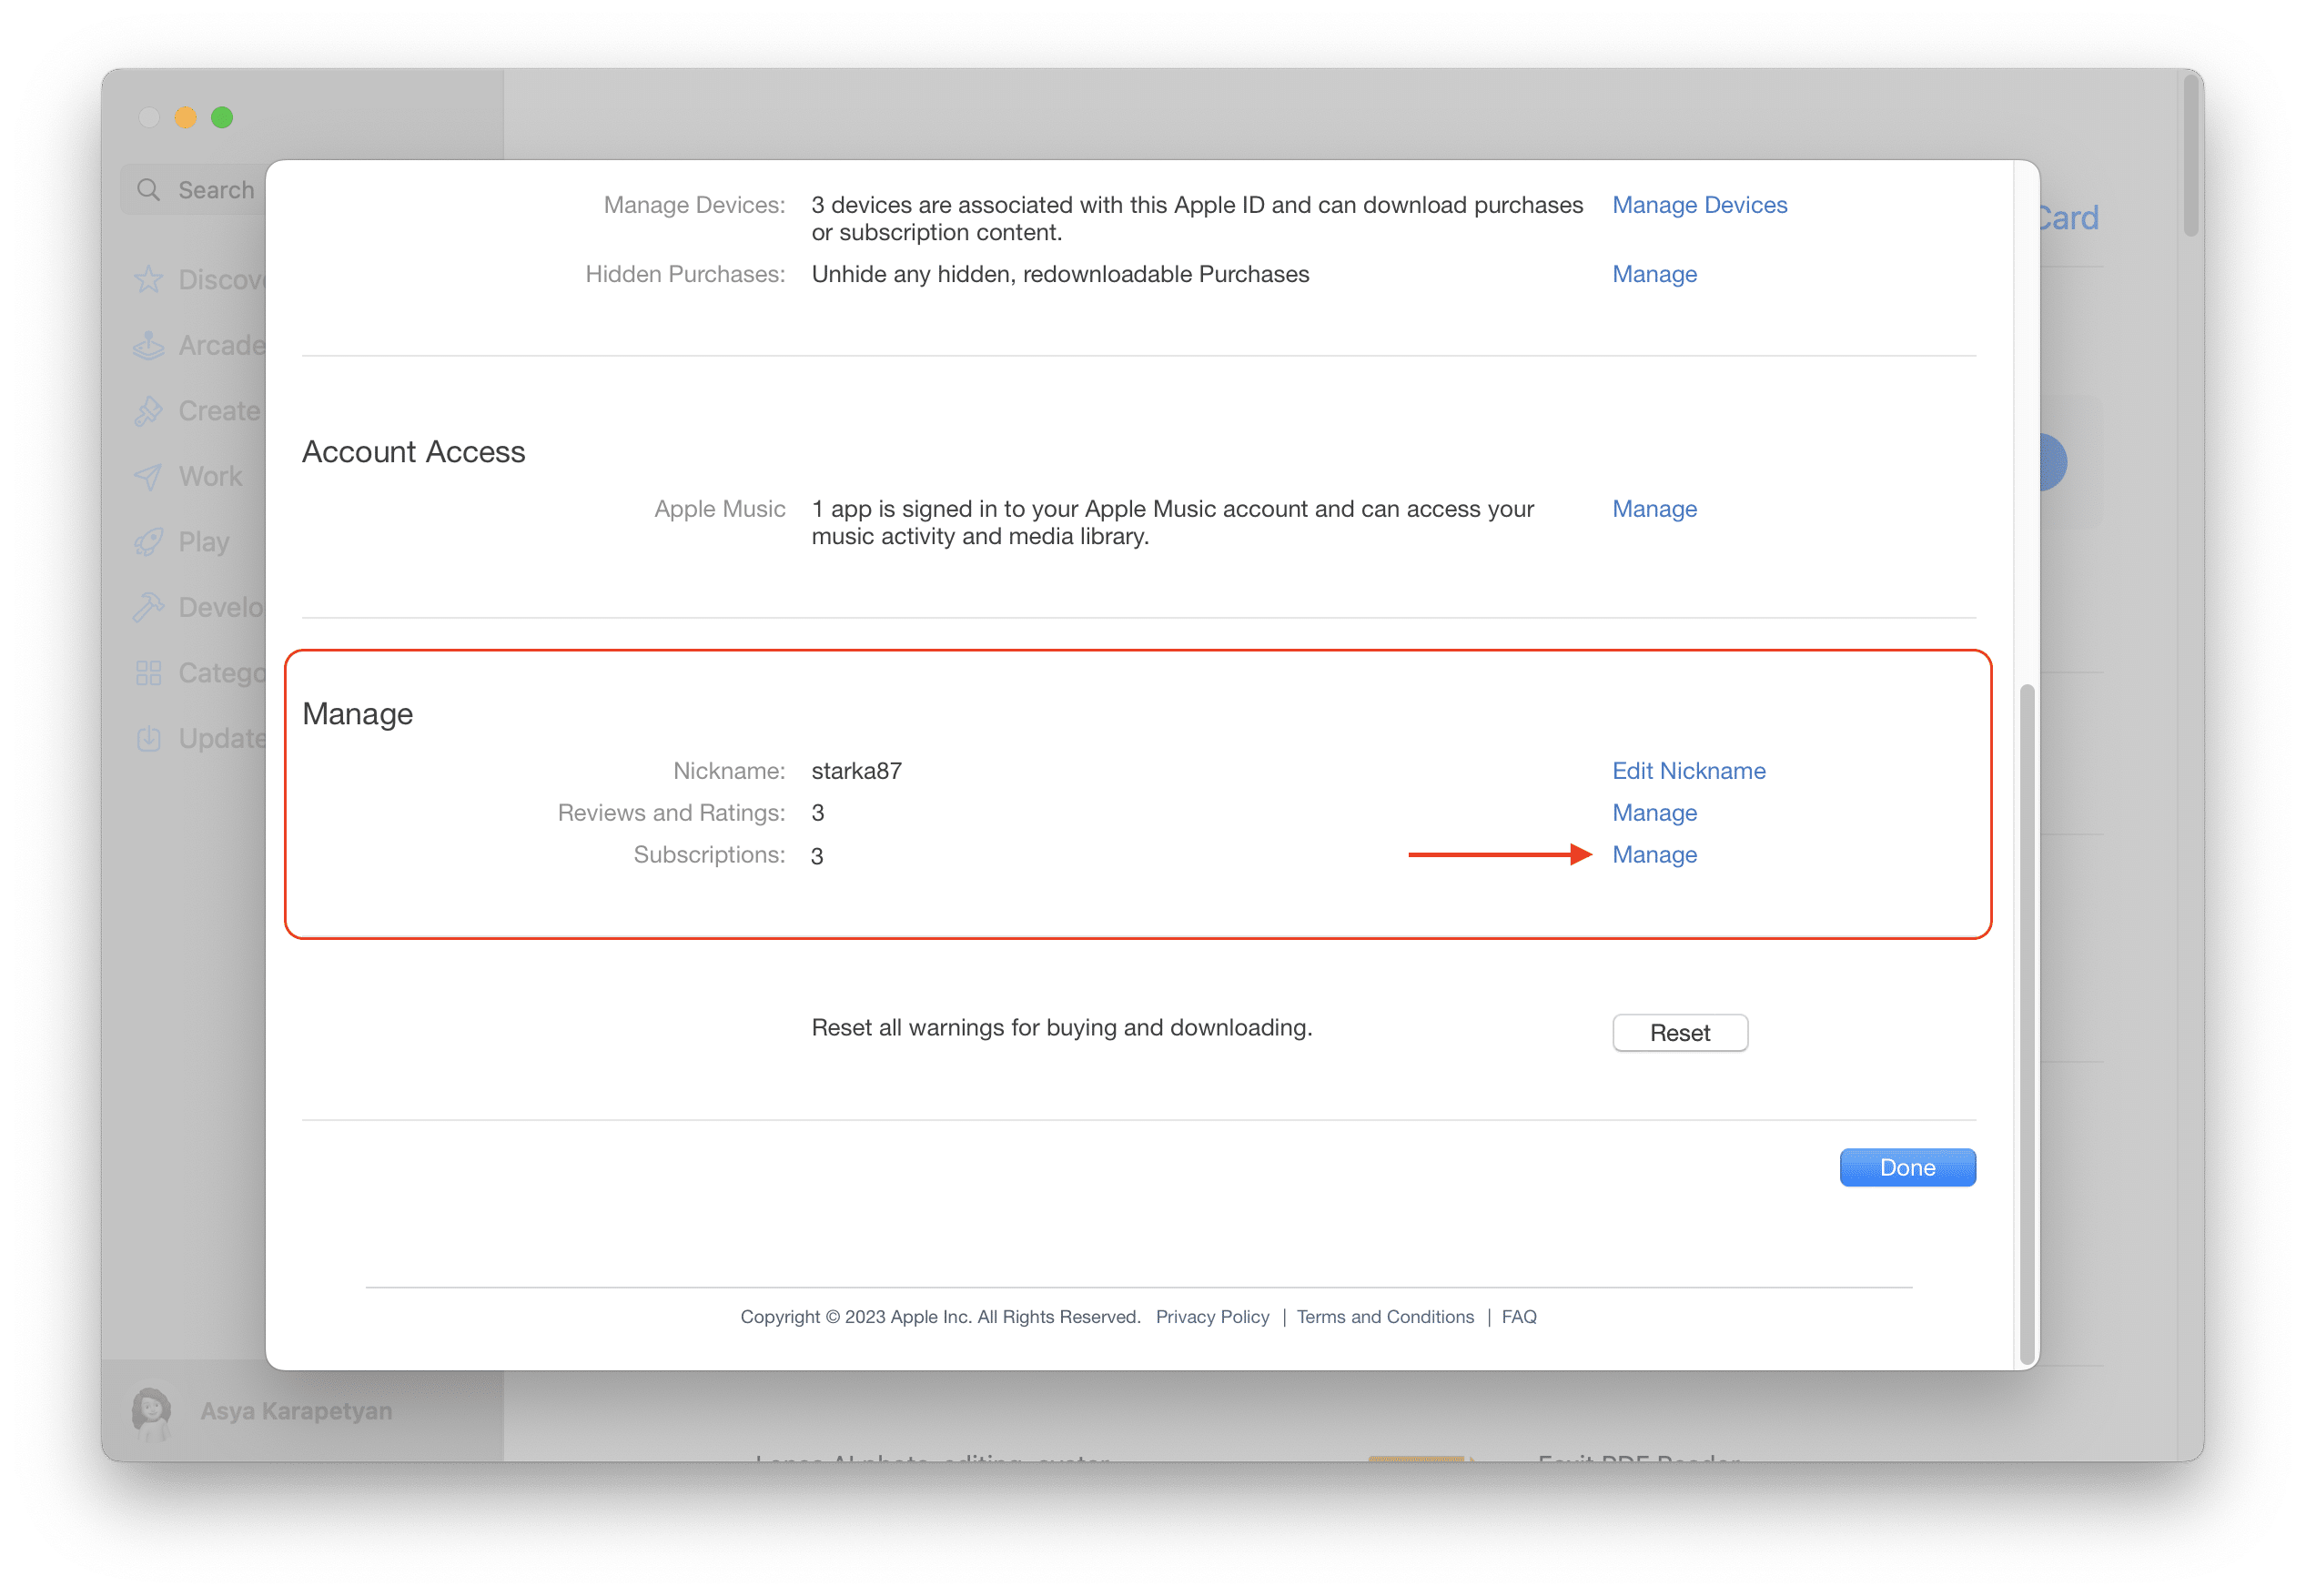 App Store window showing the subscription details